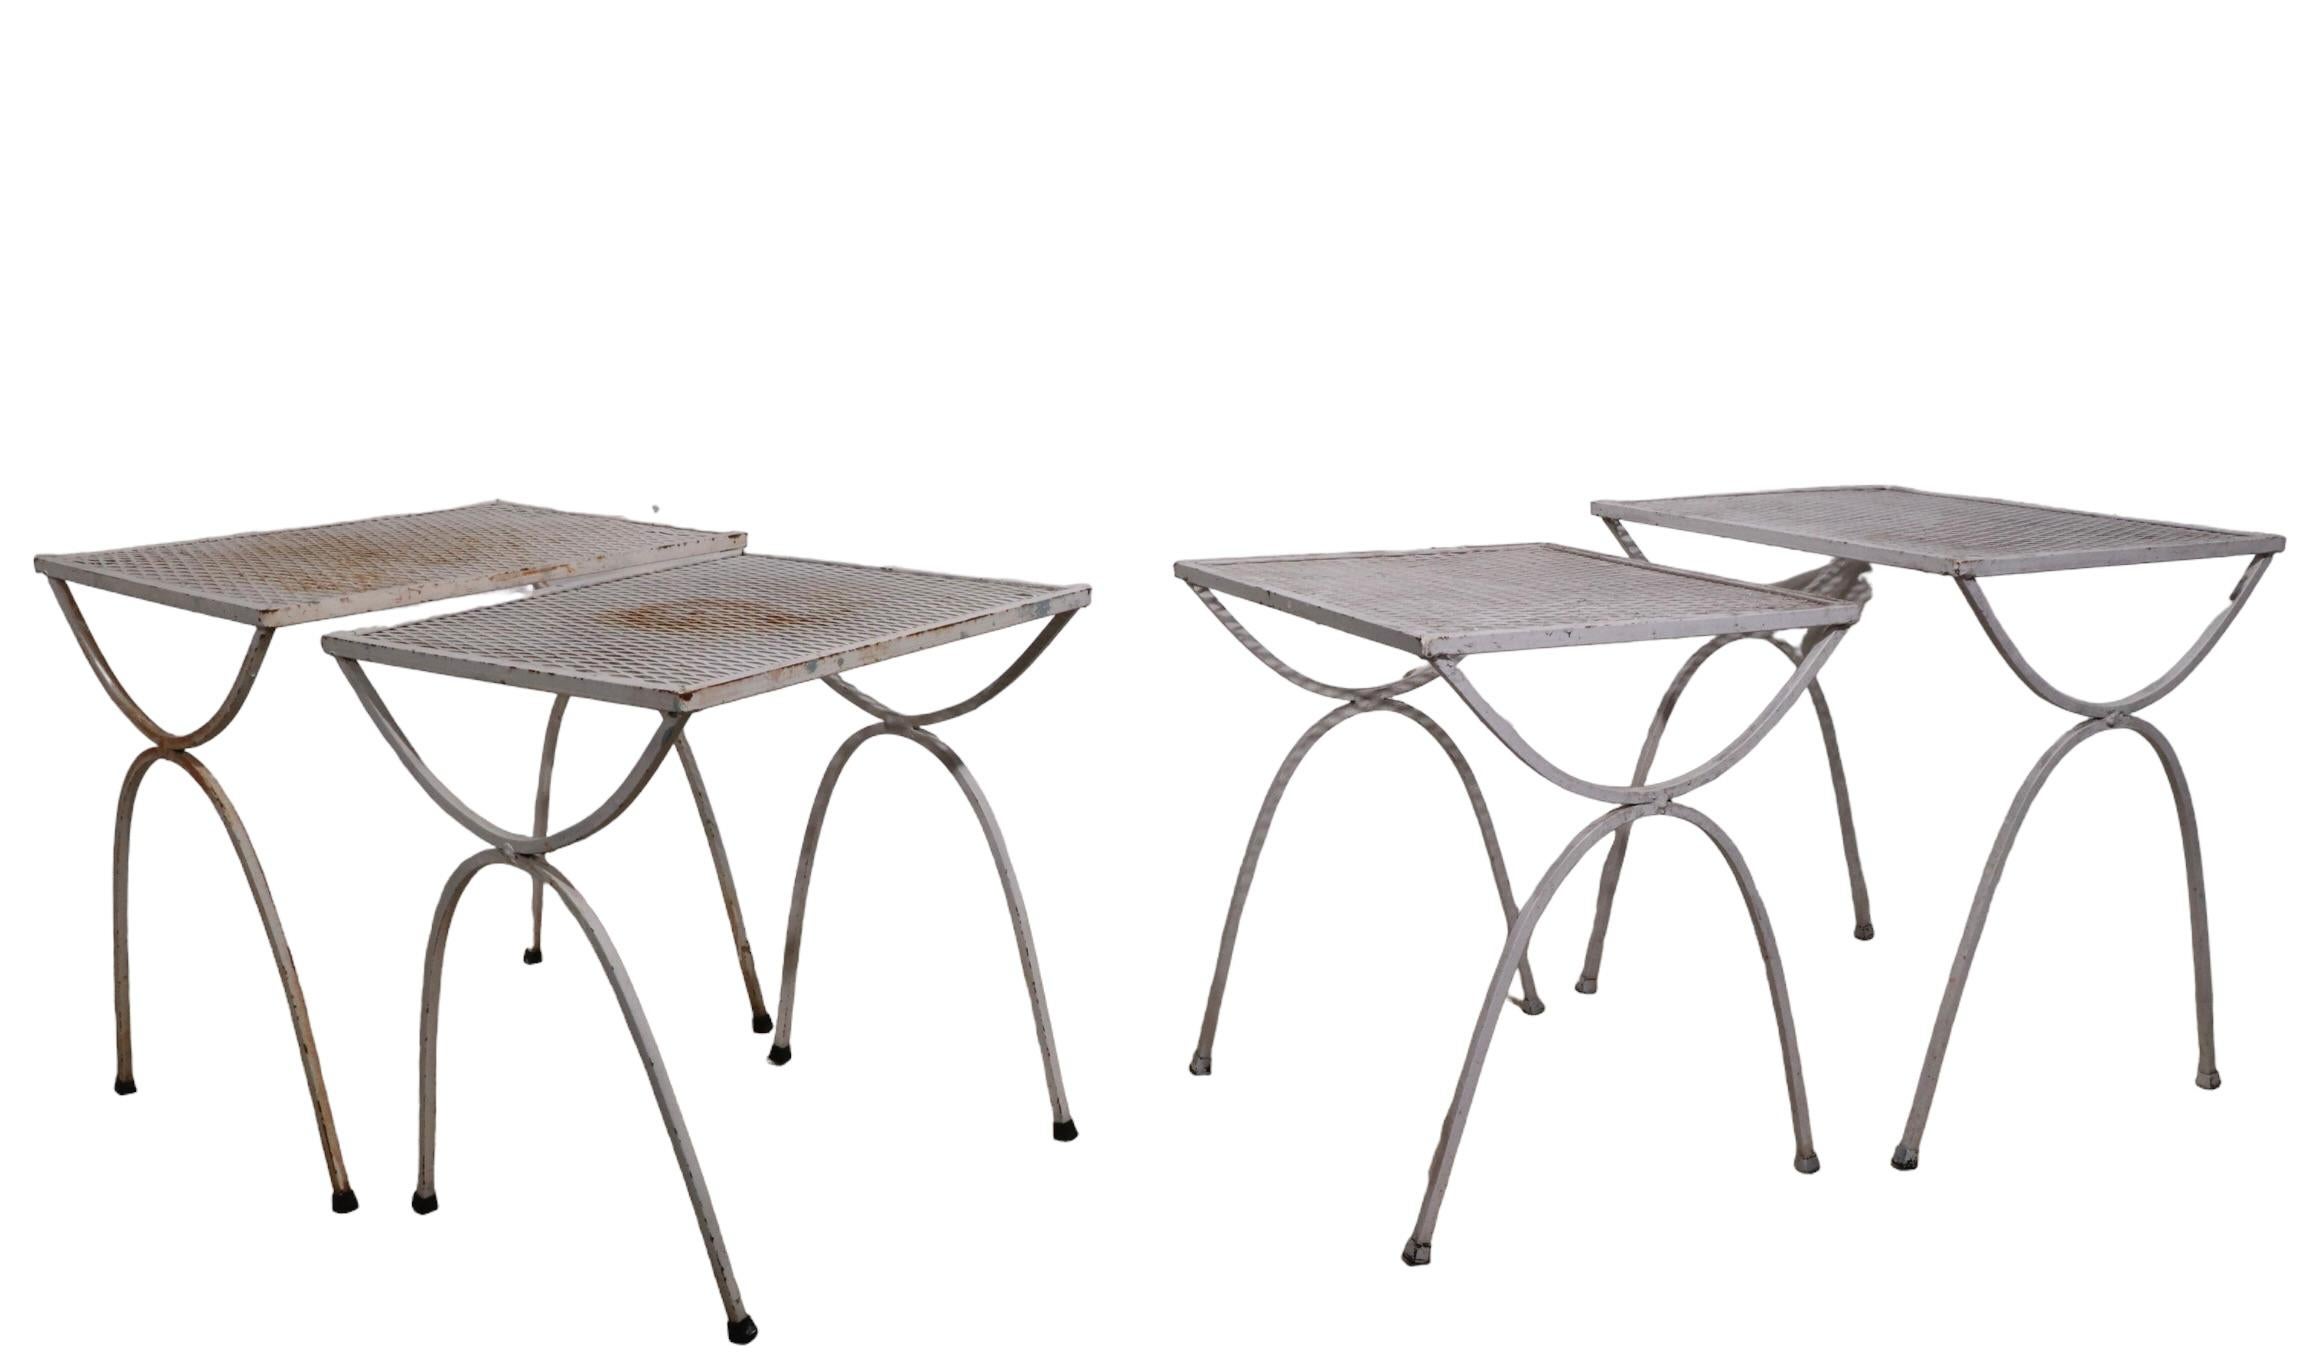 Chic architectural set of two nesting tables by Salterini. Constructed of wrought iron, and metal mesh, these tables are suitable for both indoor and outdoor use, they are structurally sound and sturdy, all show some cosmetic wear to the paint